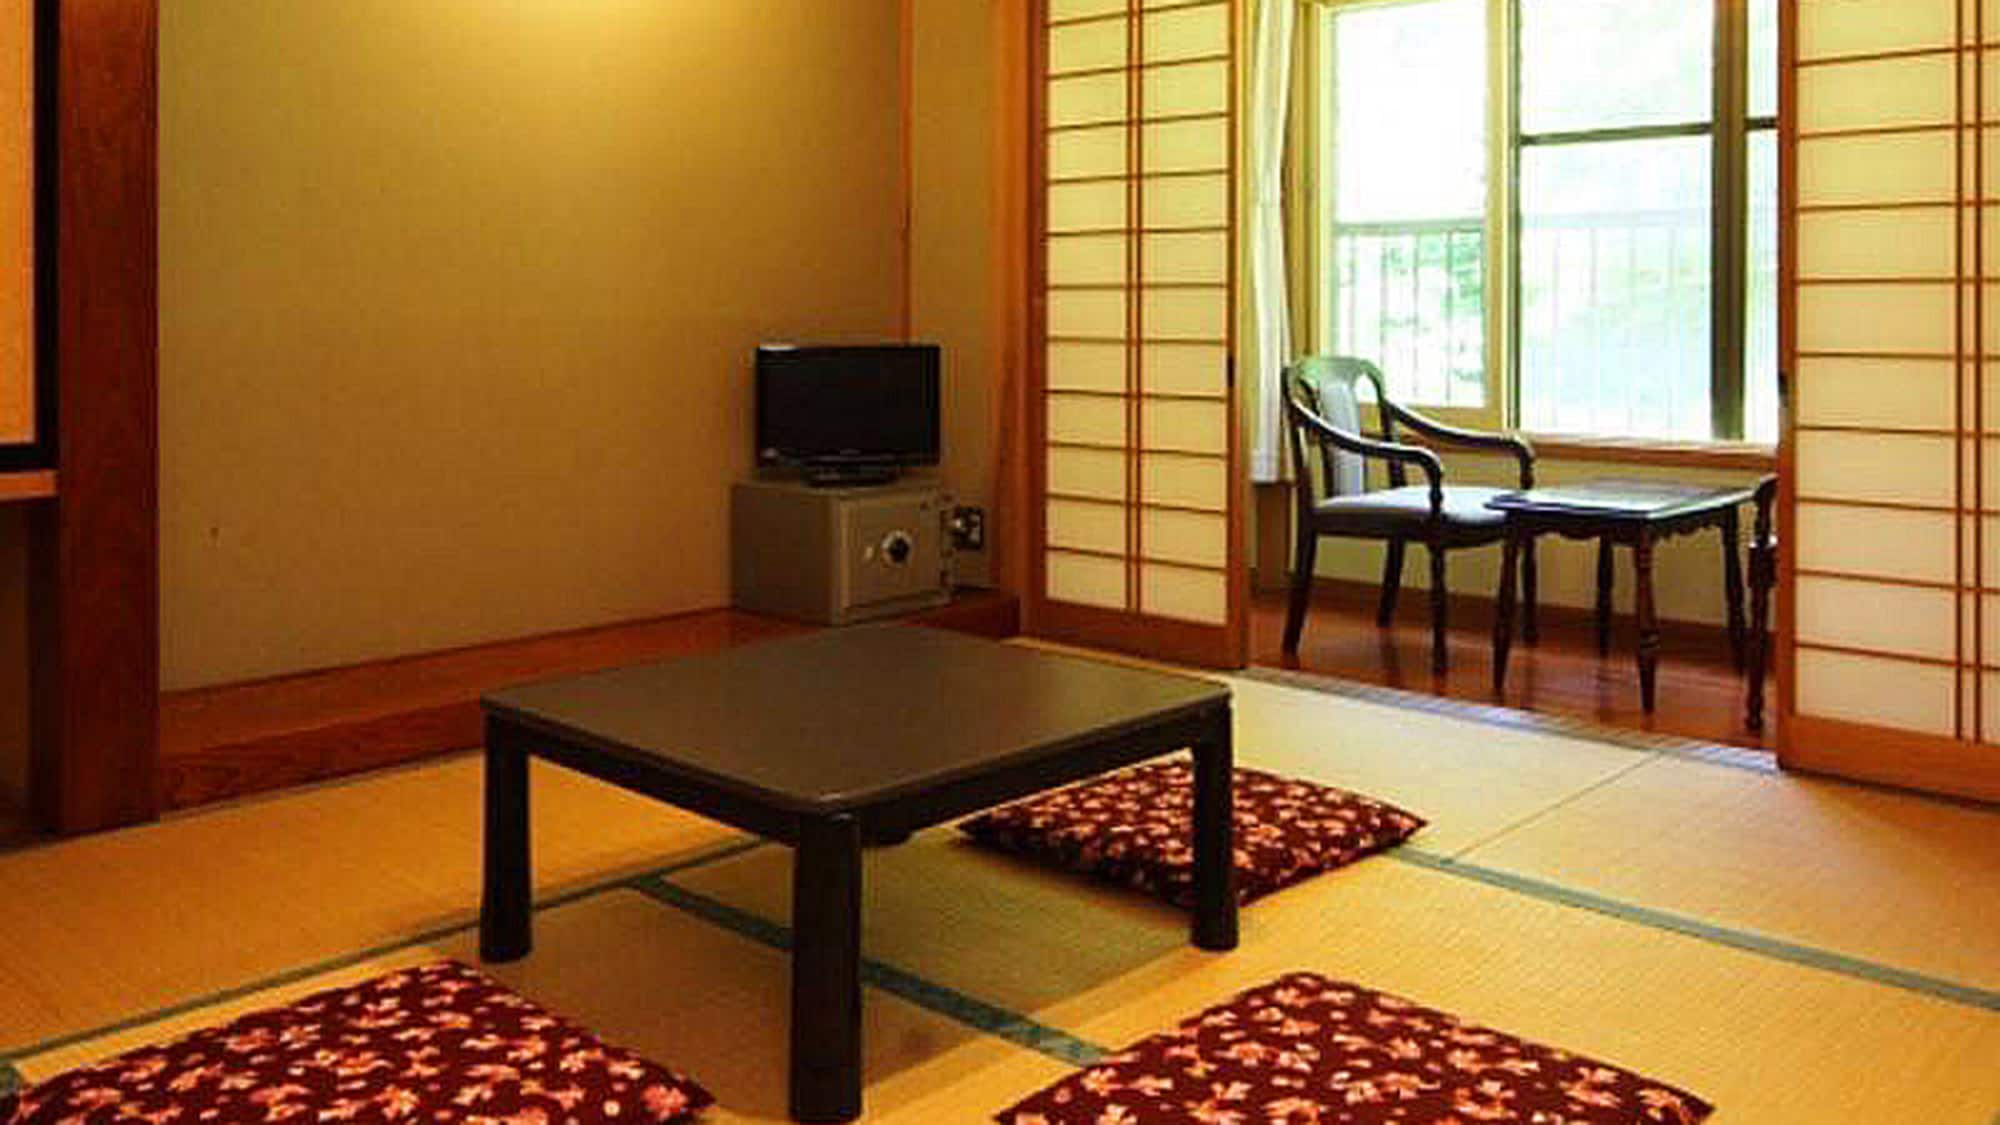 ・ [Guest room] Japanese-style room 8 tatami mats